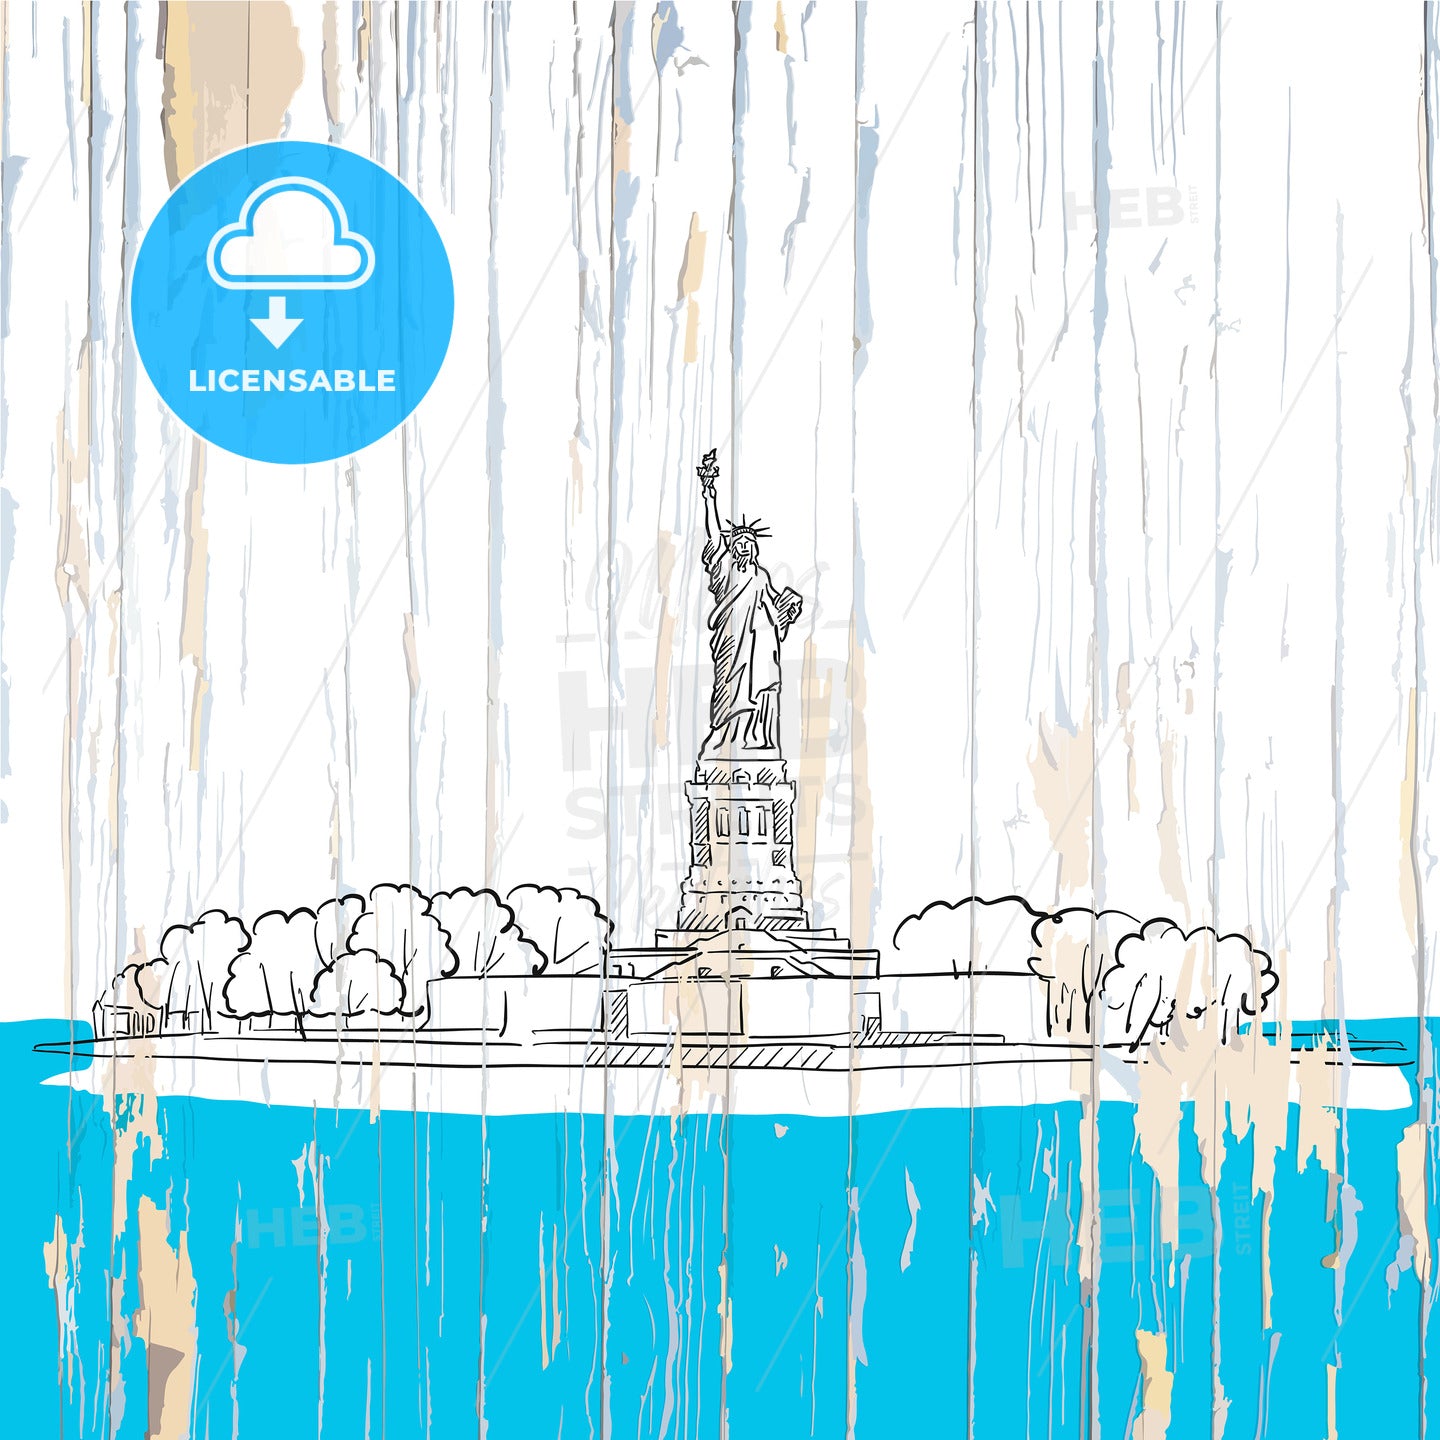 Lady liberty drawing on wood – instant download